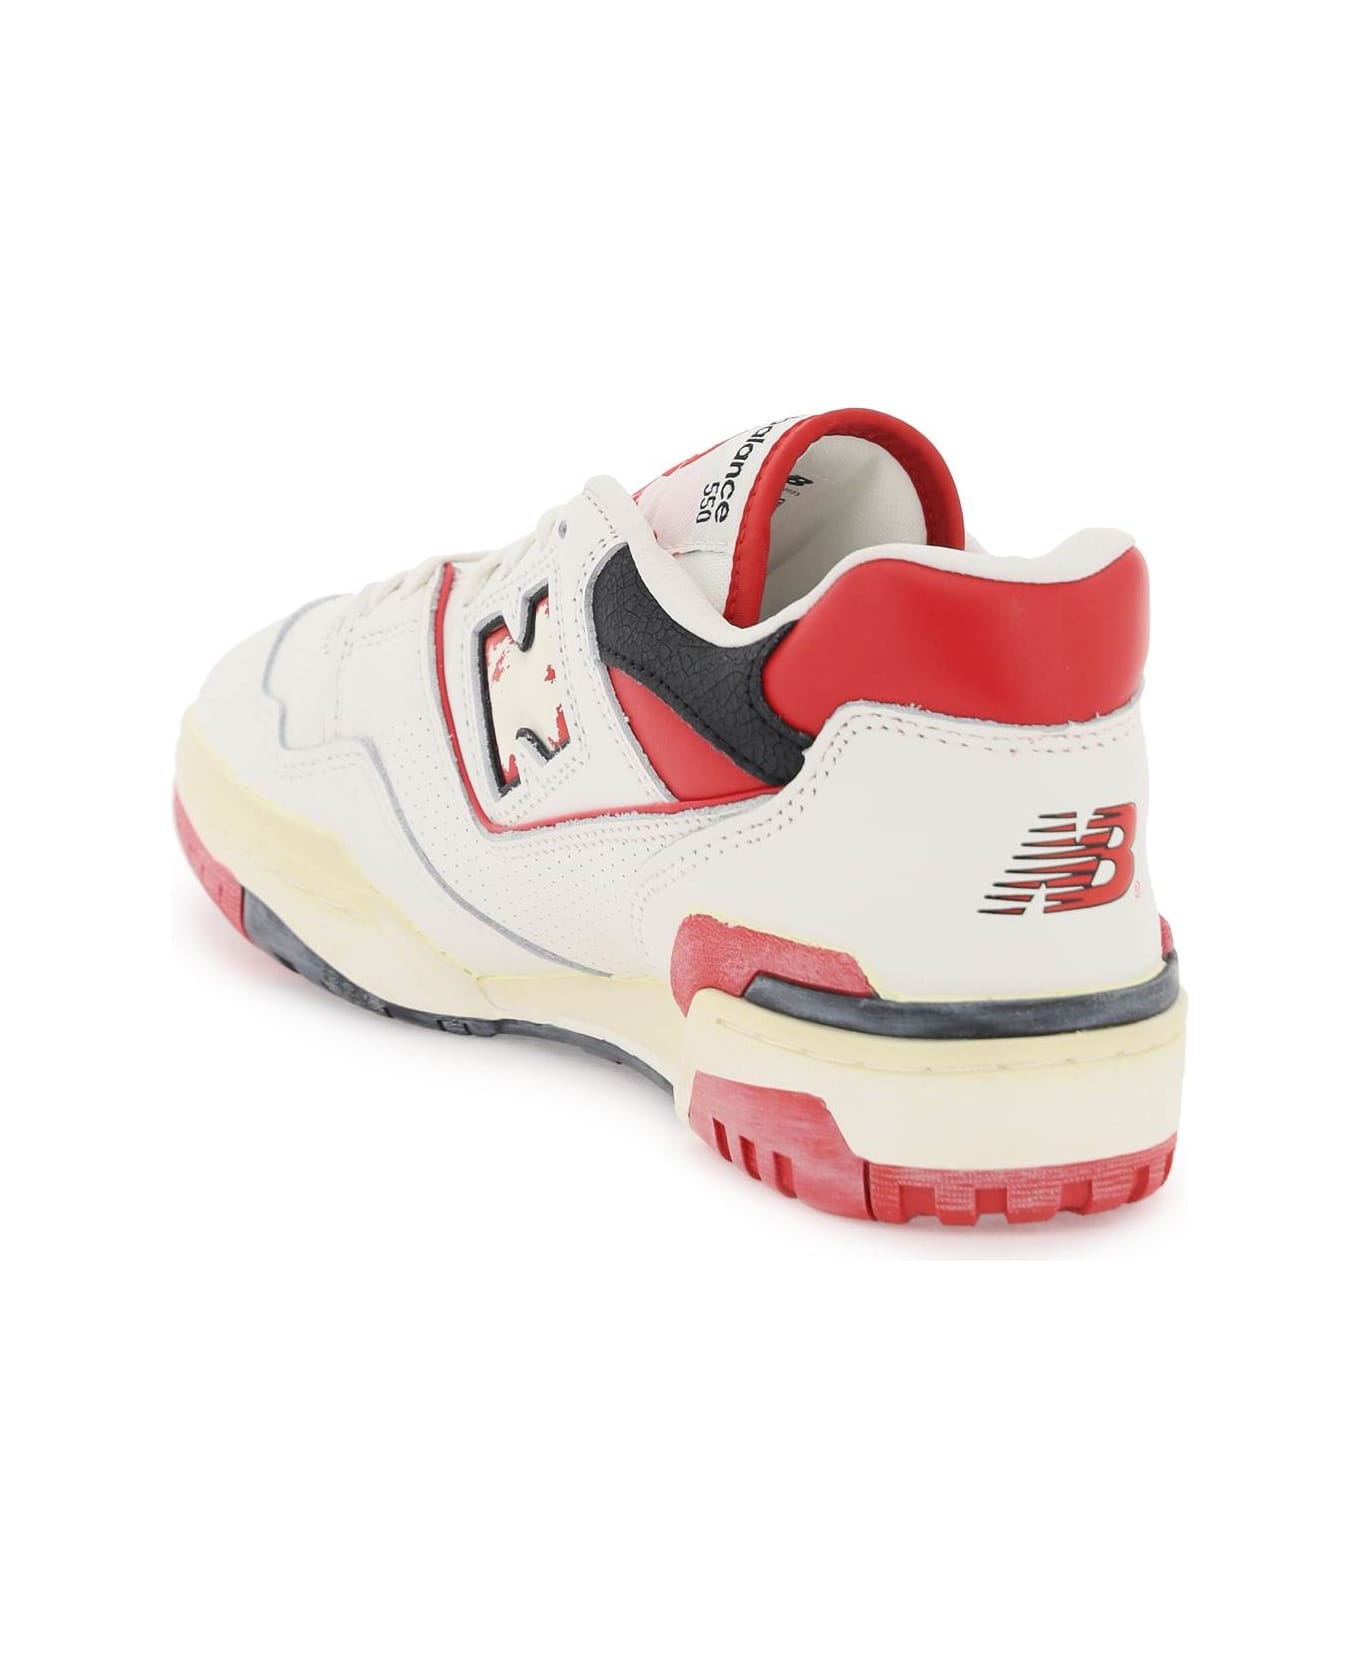 New Balance Vintage-effect 550 Sneakers - OFF WHITE RED (White)